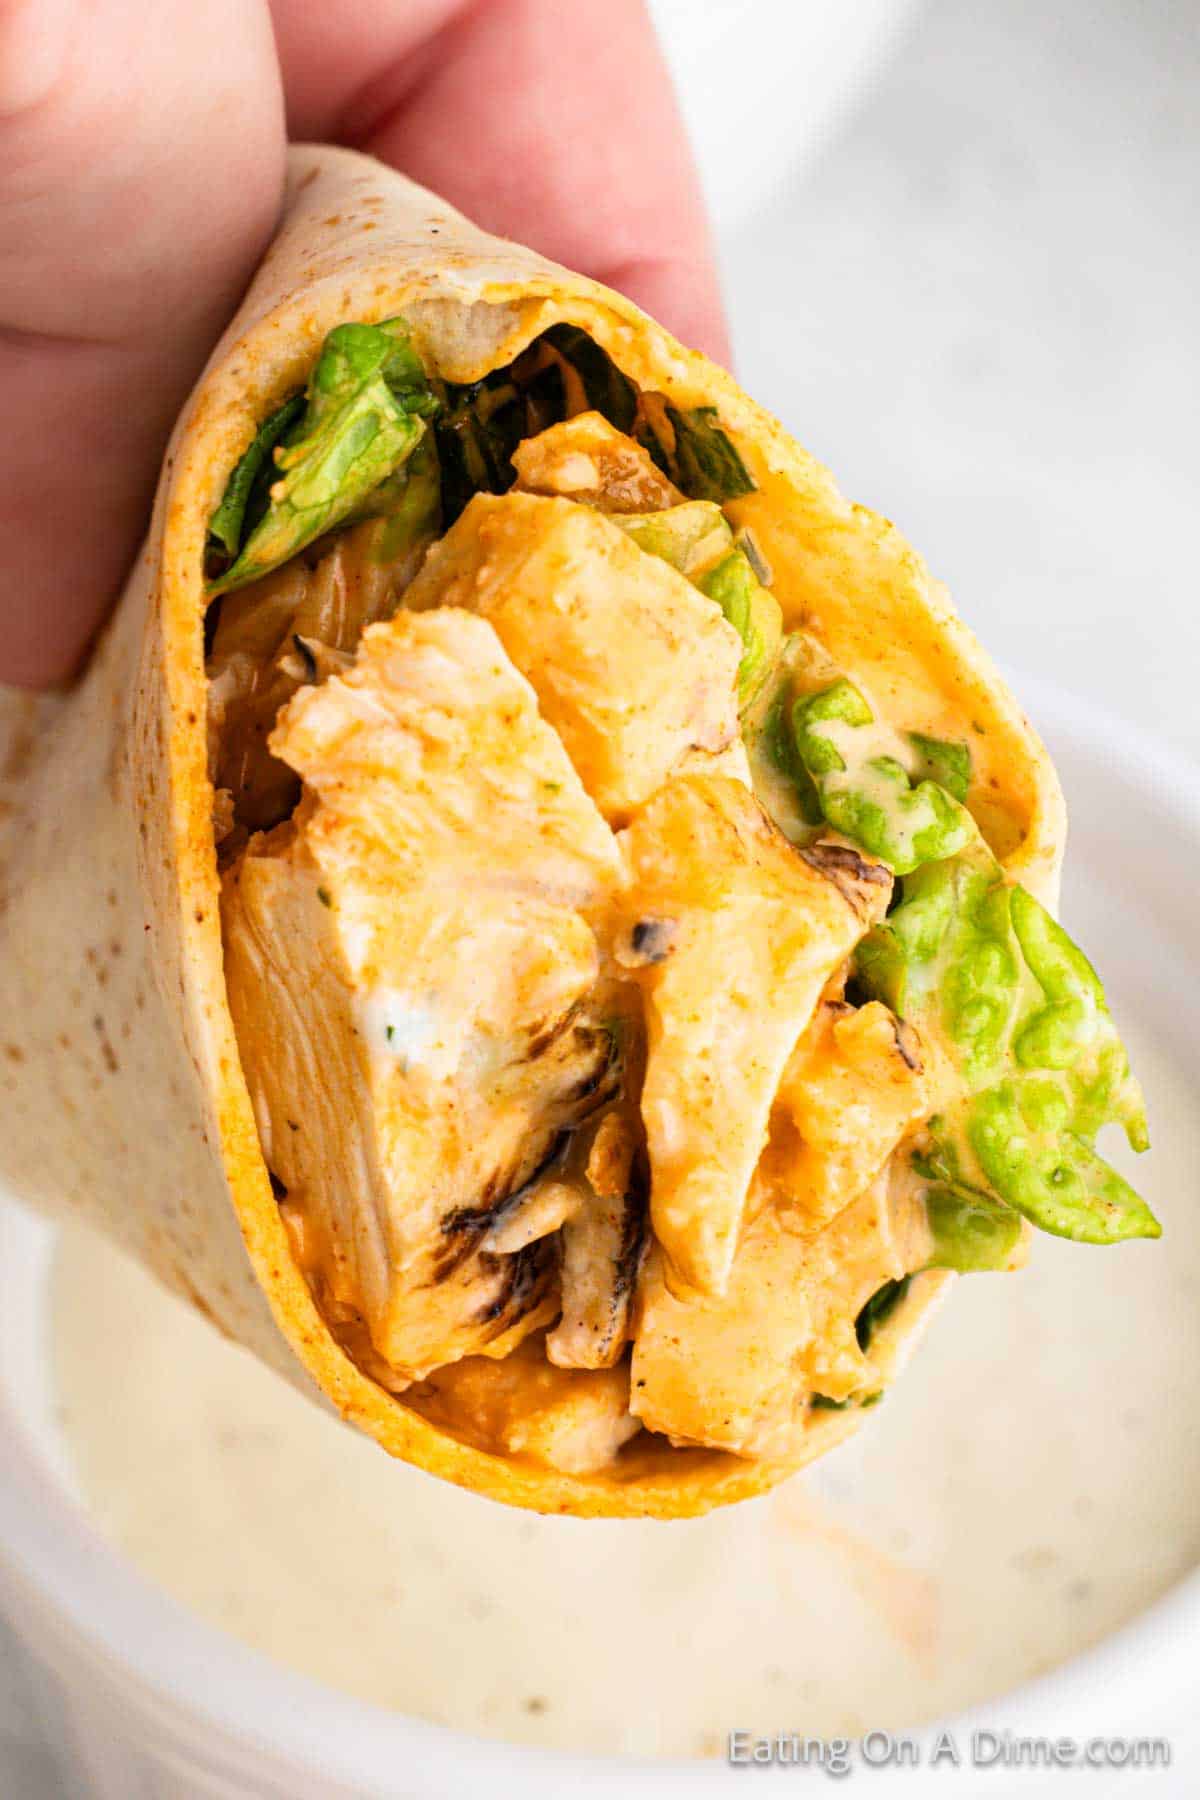 Buffalo Chicken Wrap up close showing the buffalo chicken and lettuce